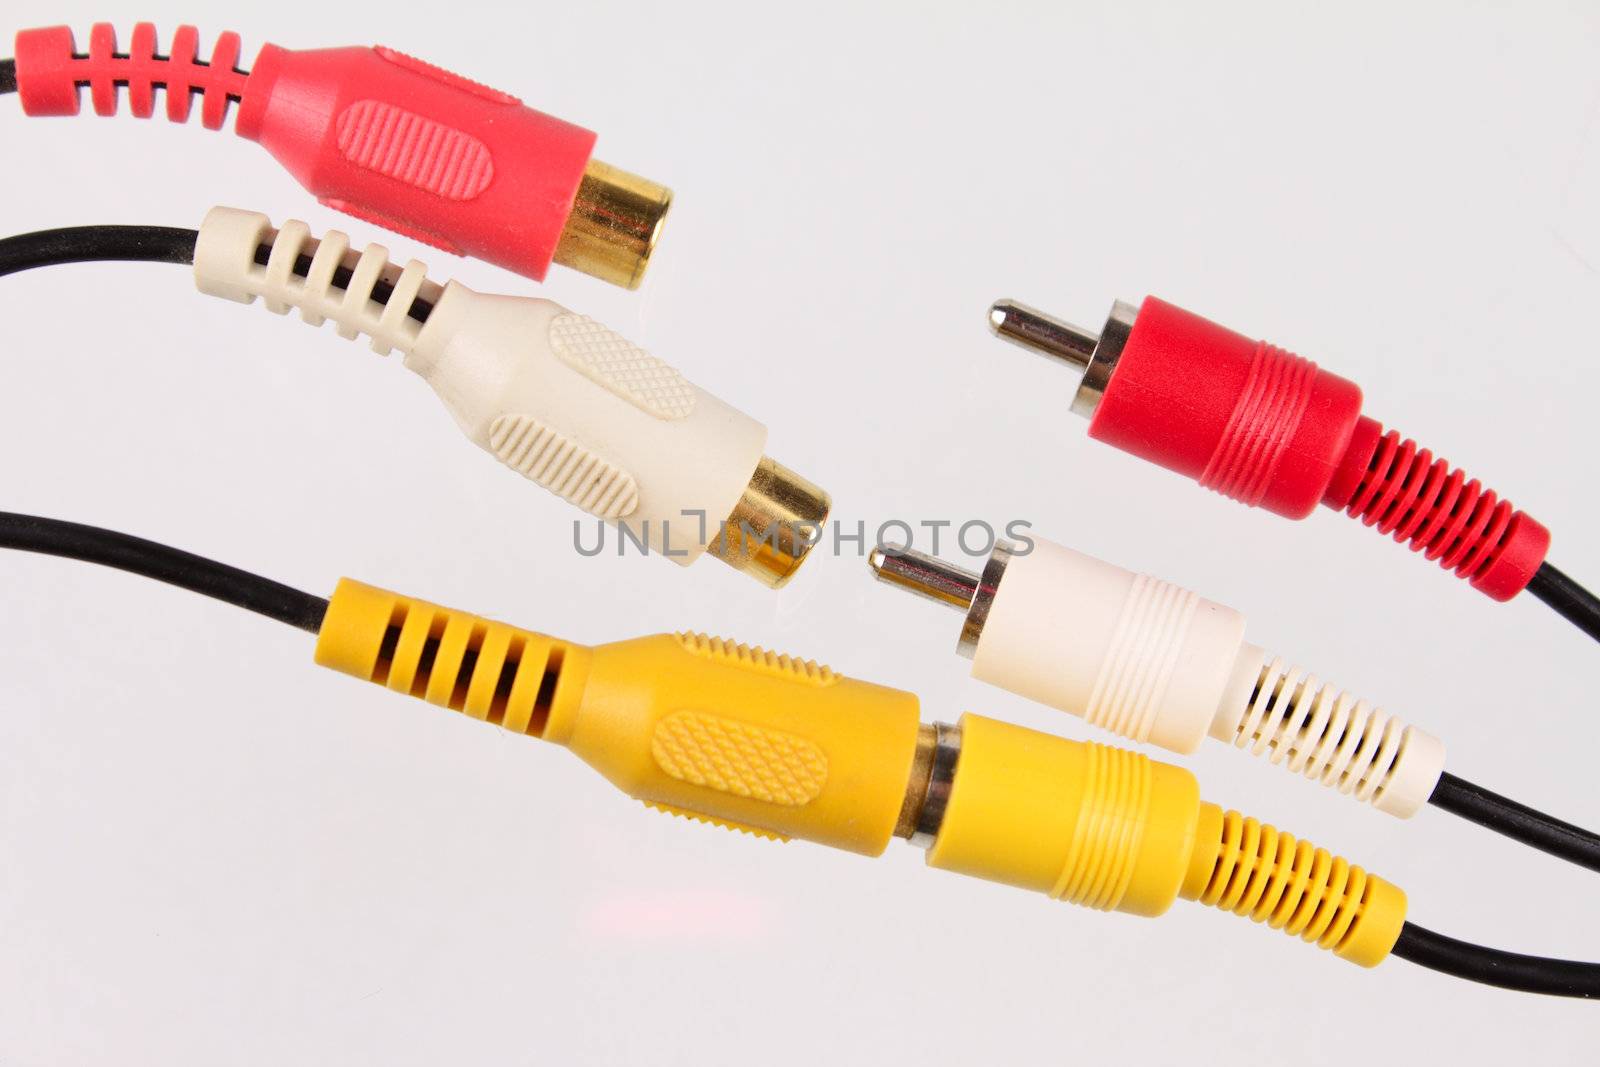 RCA connectors by Incarnatus